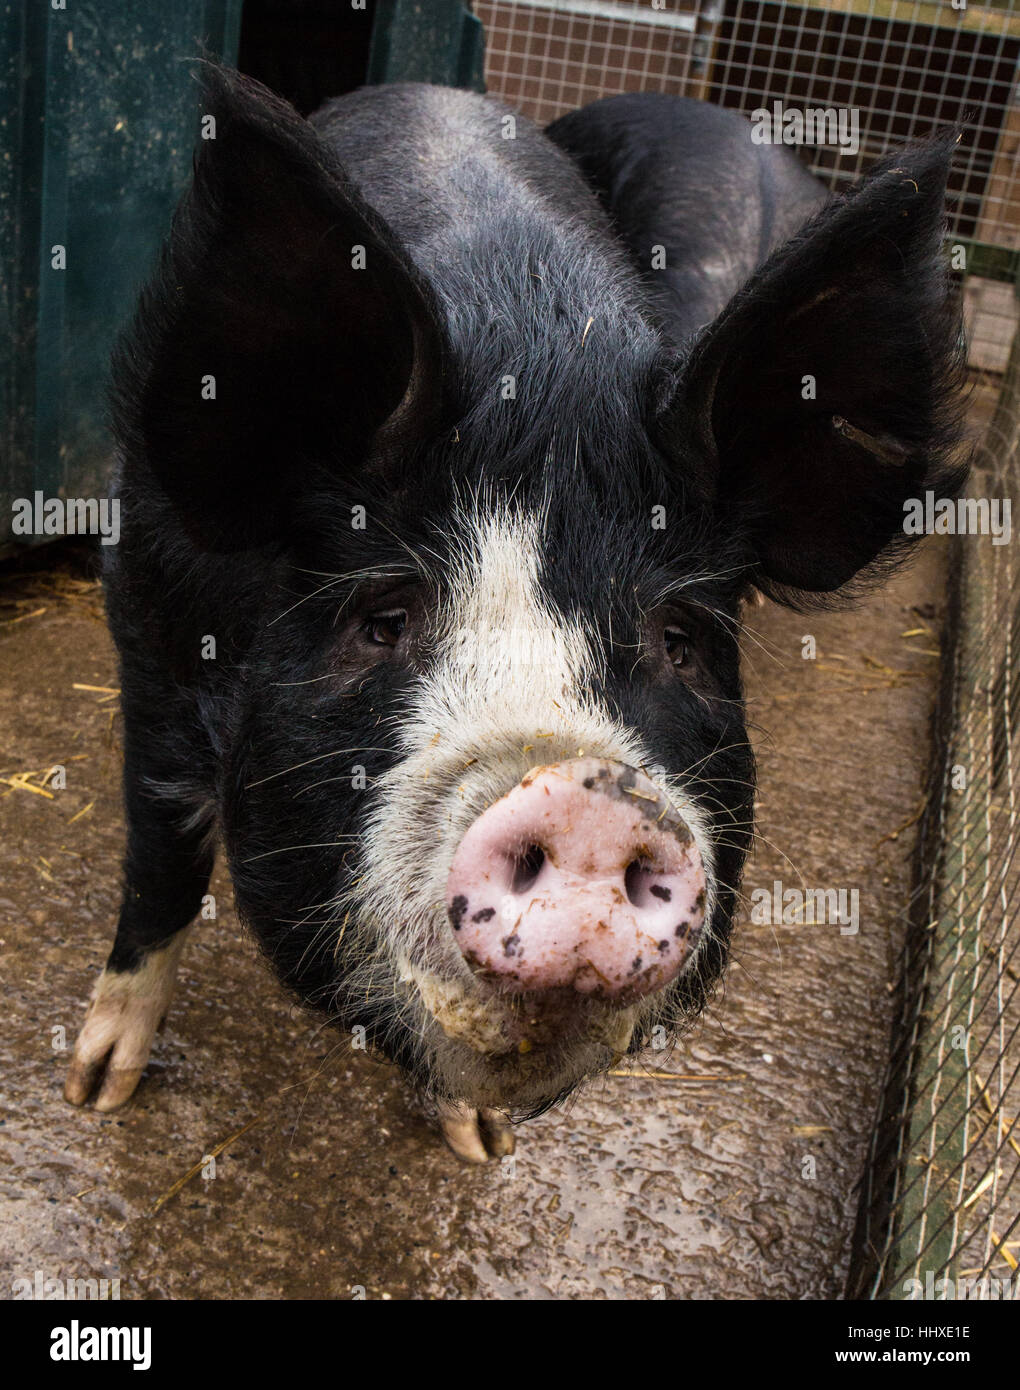 black and white farm pig in a pen looking up Stock Photo